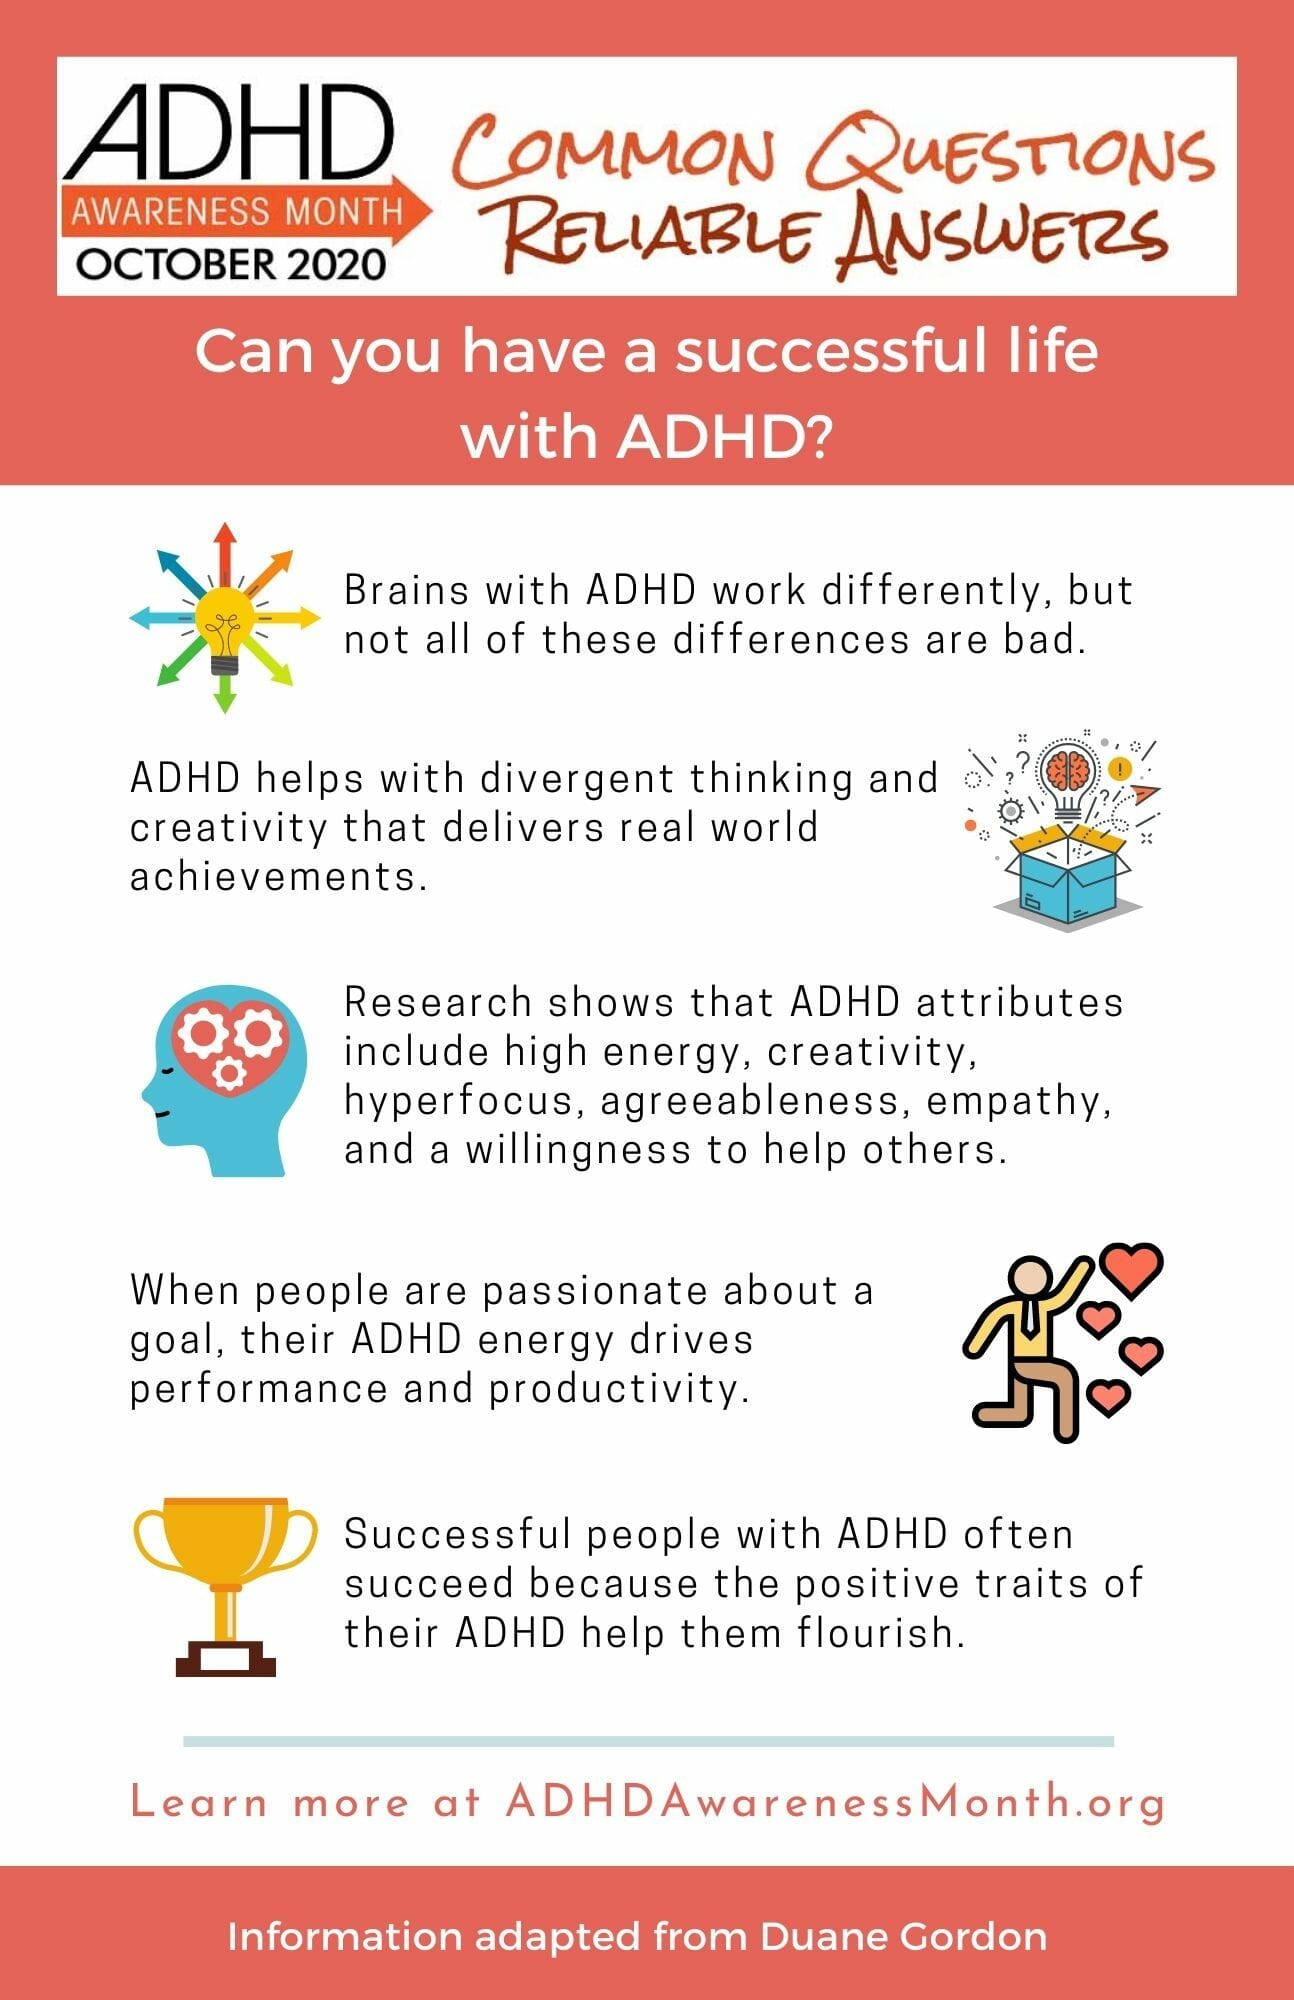 What are the advantages and disadvantages of disclosing at work that I have  ADHD? - ADHDAwarenessMonth 2023